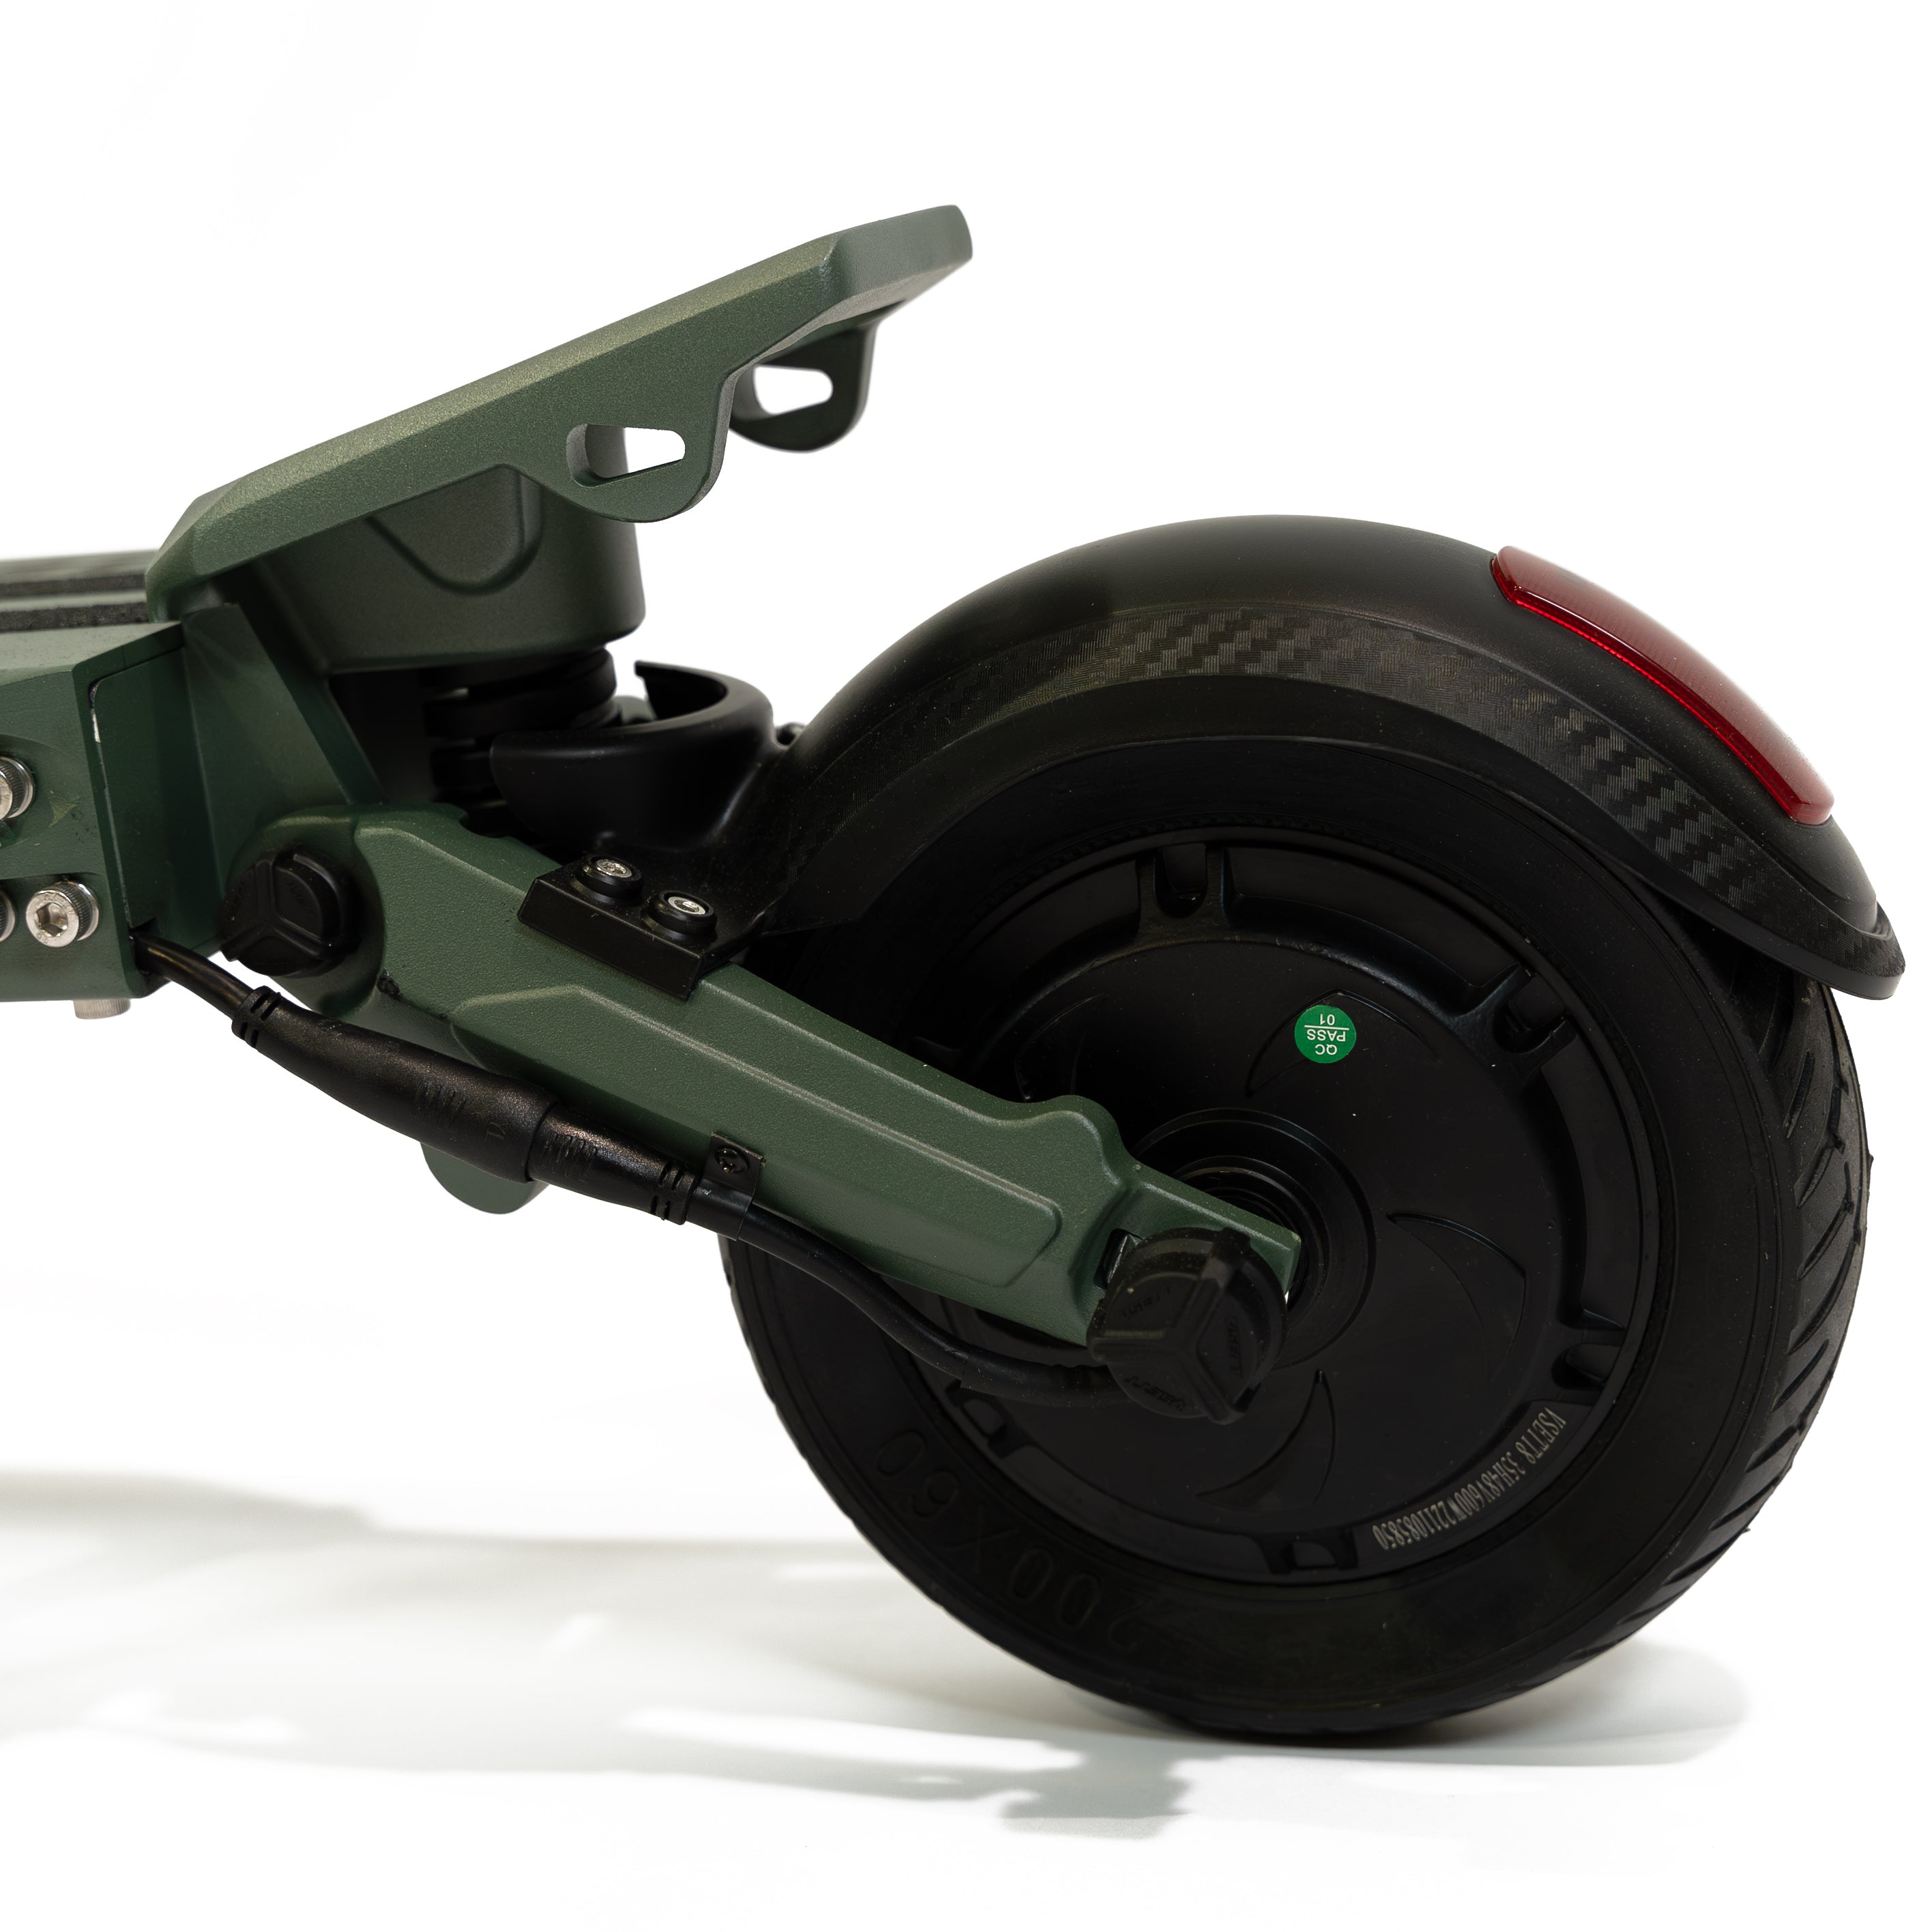 VSETT 8 Electric Scooter - LOCO Scooters